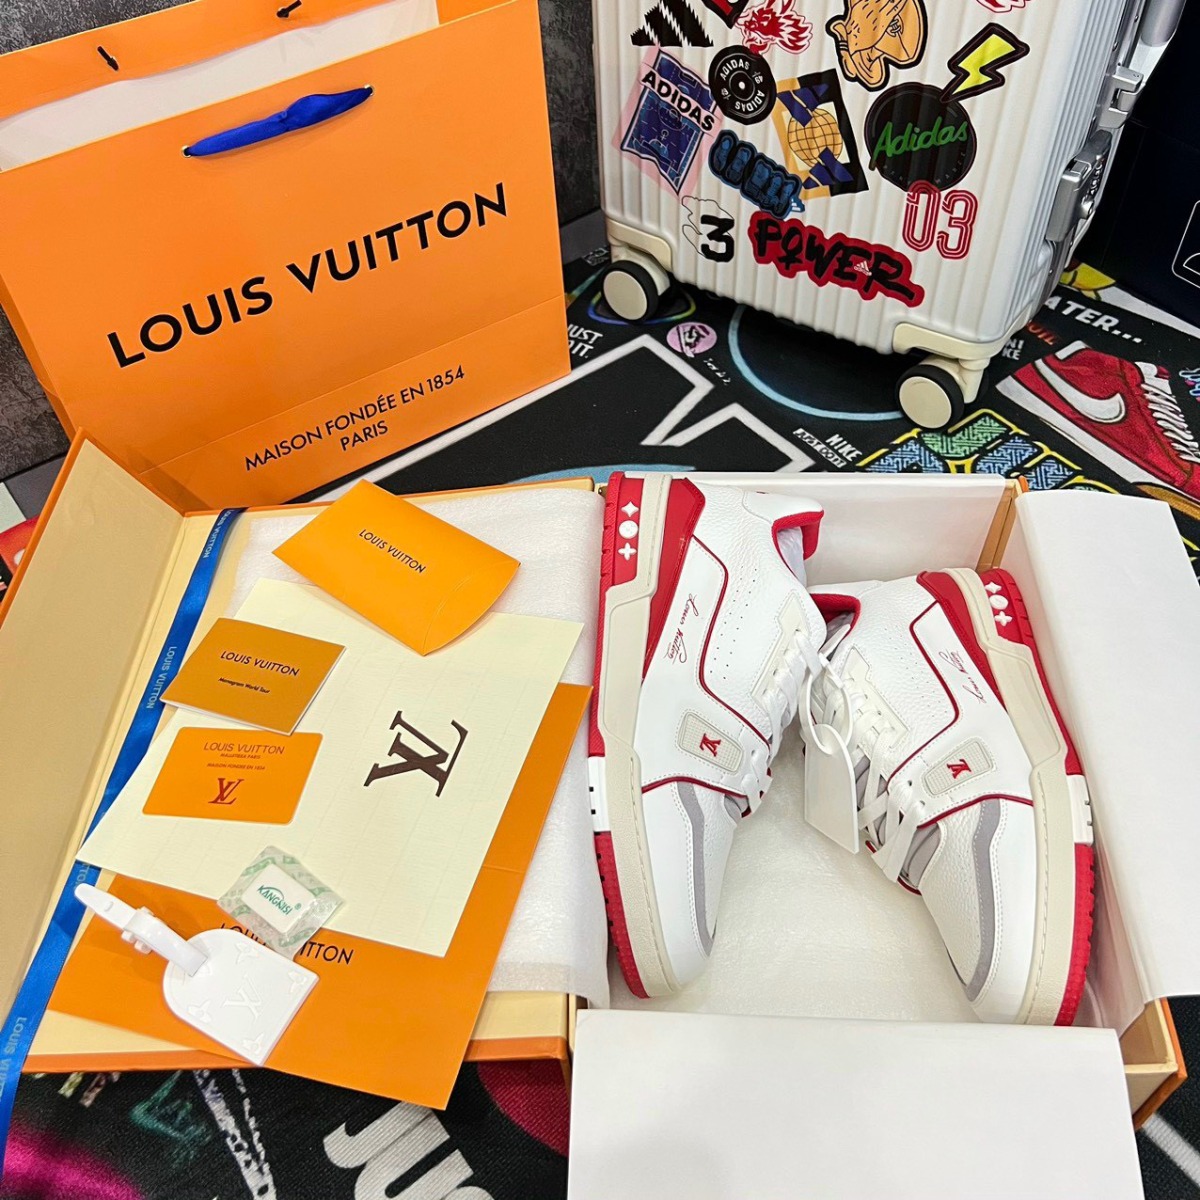 Giày LV Trainer #54 White Red Like Auth 99.99%